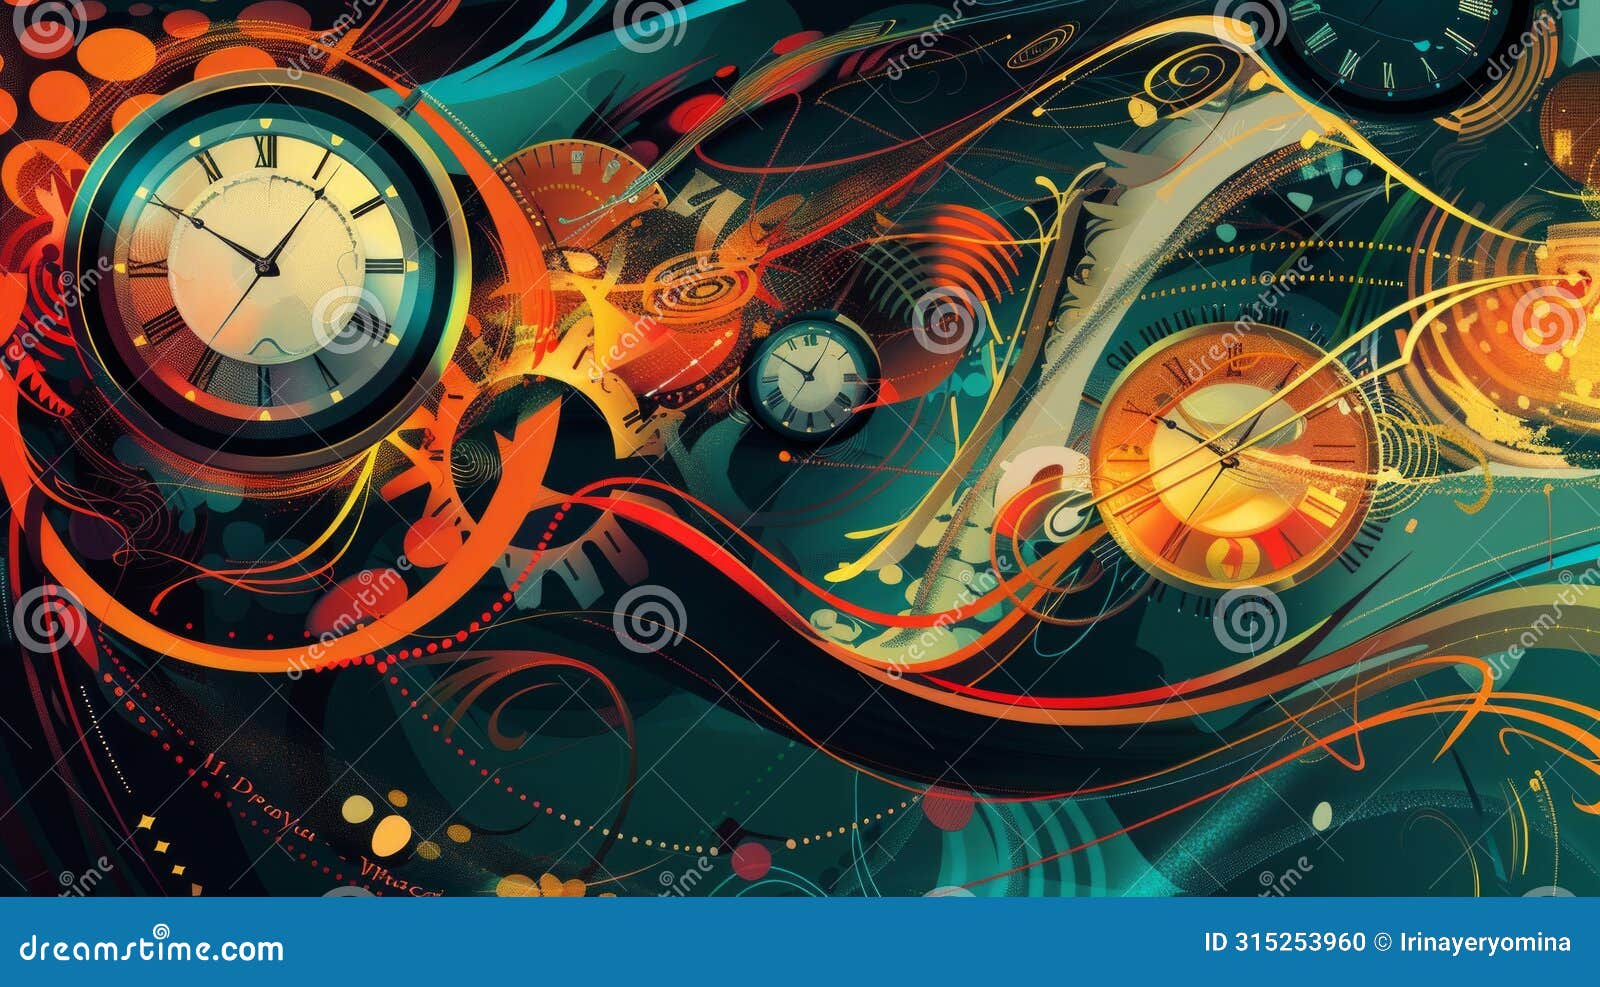 abstract time slip with clocks and temporal waves